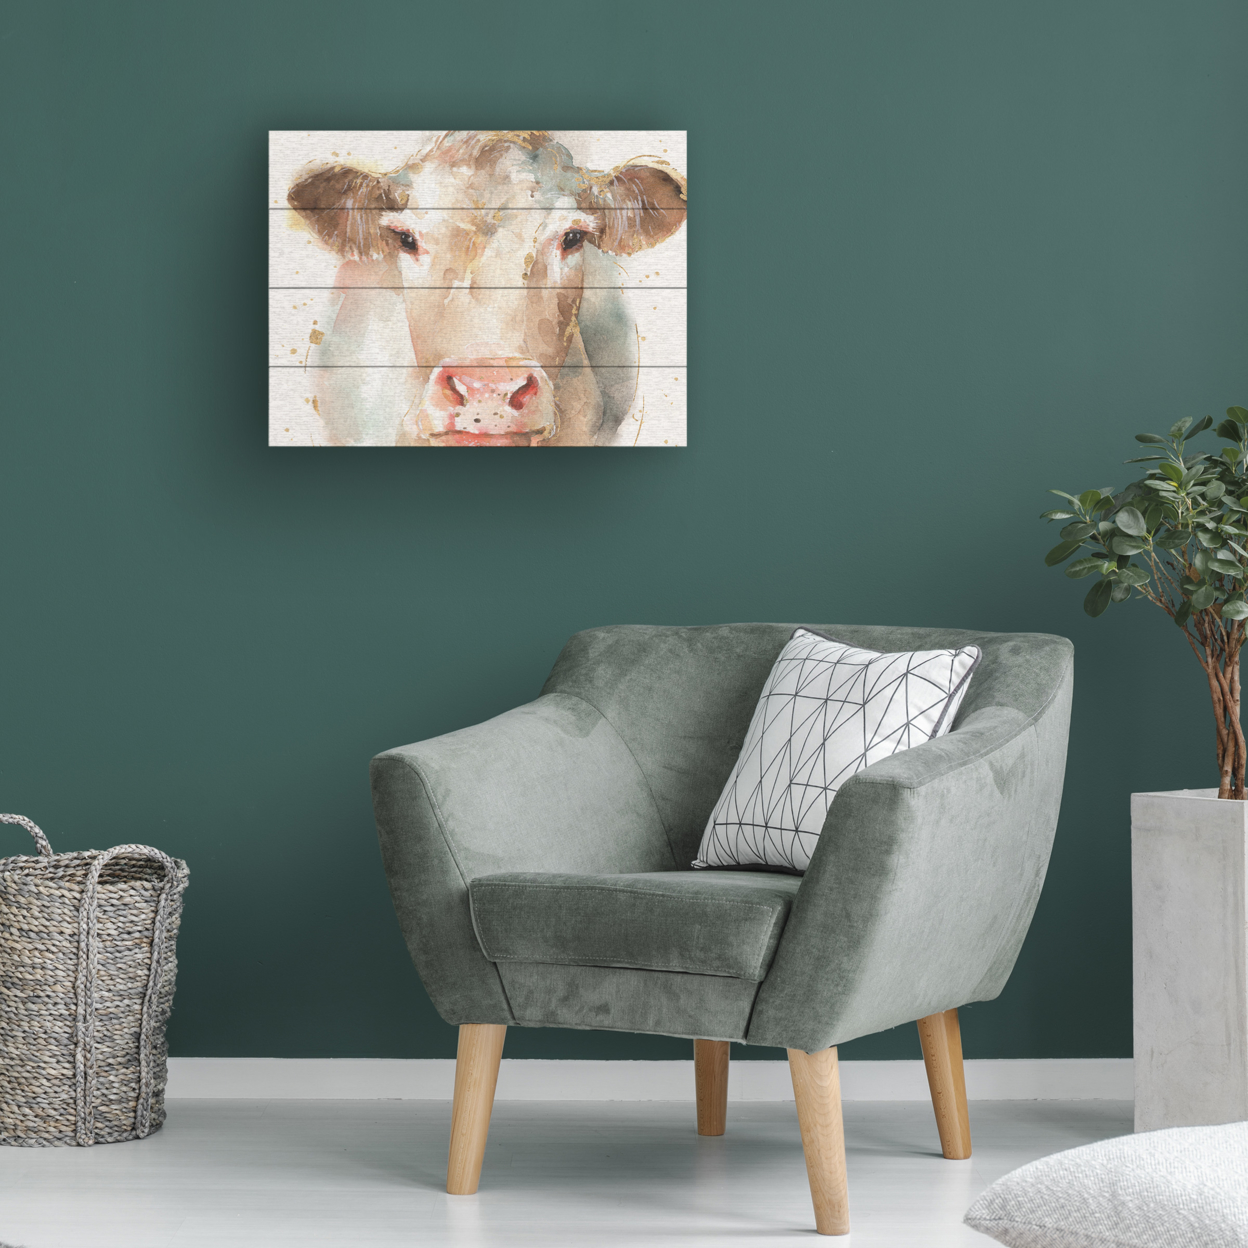 Wall Art 12 X 16 Inches Titled Farm Friends II Ready To Hang Printed On Wooden Planks